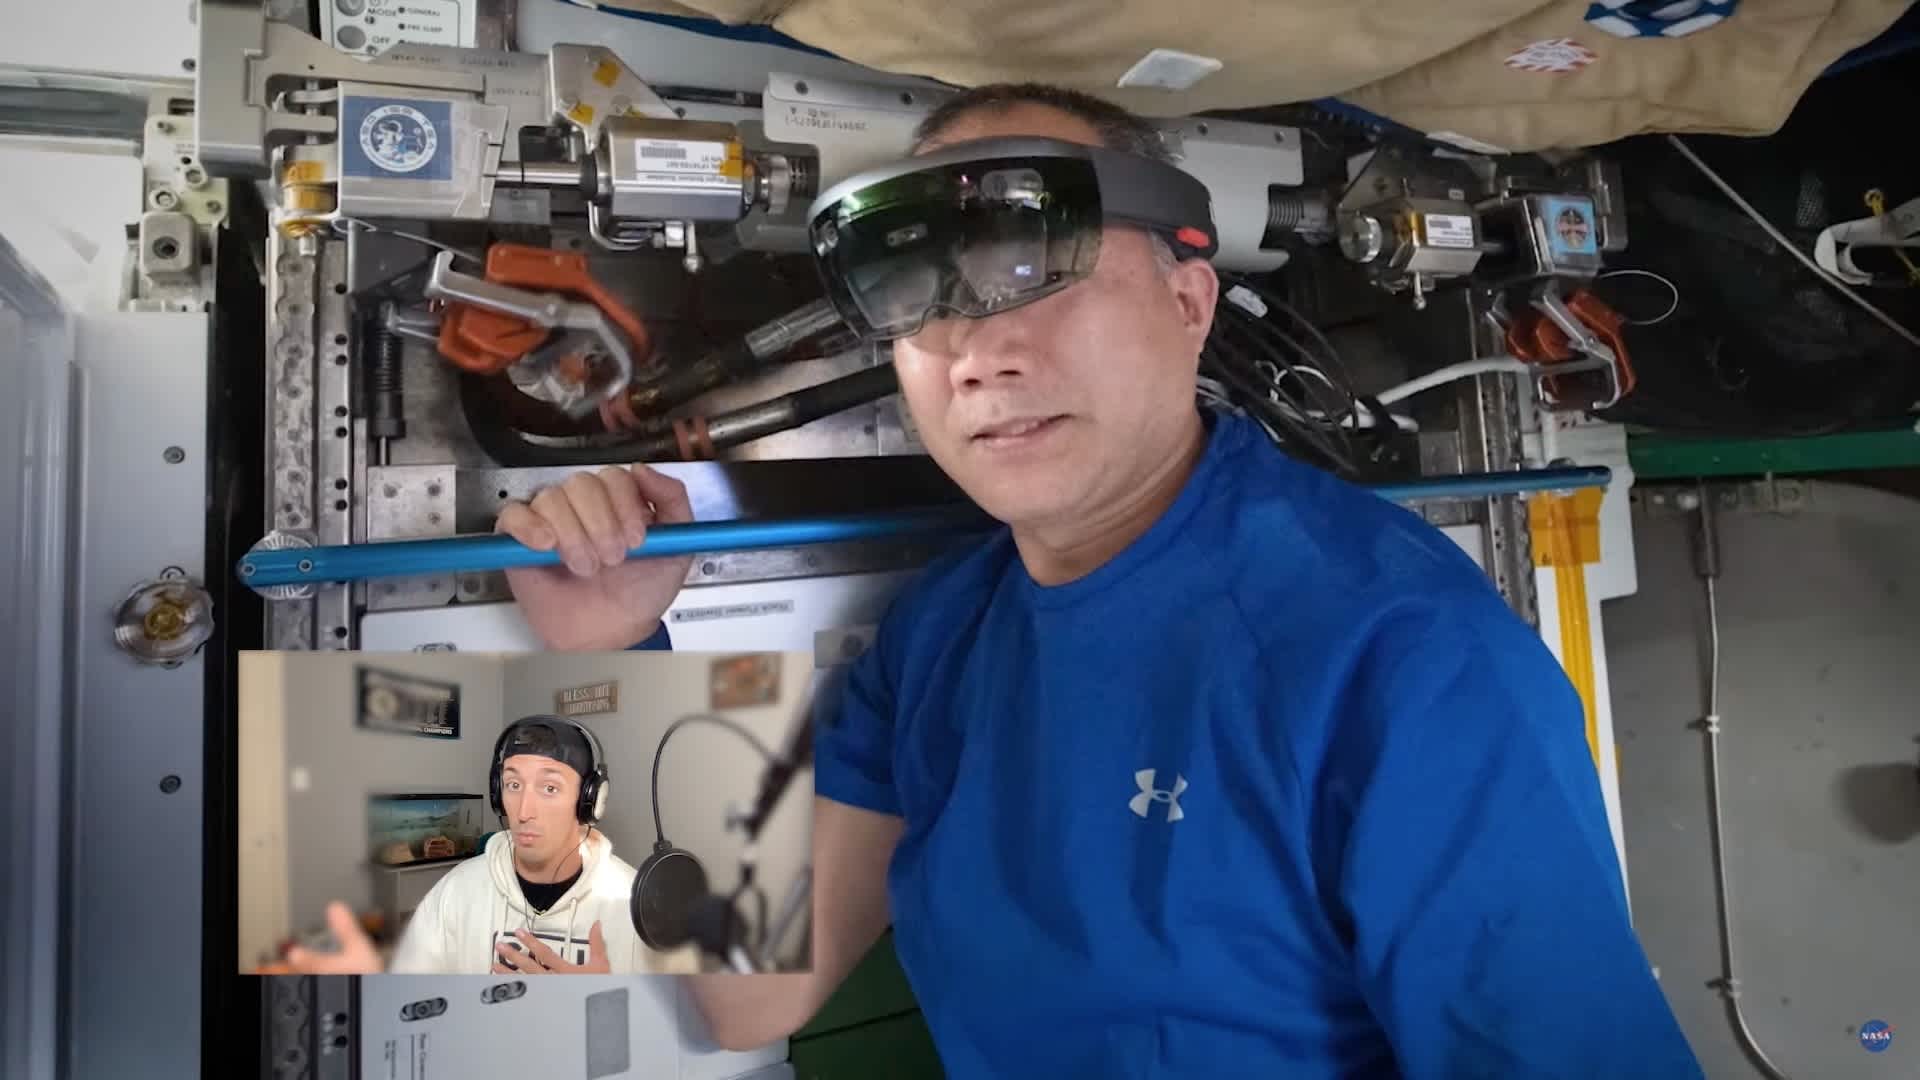 Shane explains NASA's use of the Microsoft Hololens on the International Space Station over the image of an astronaut using the device.